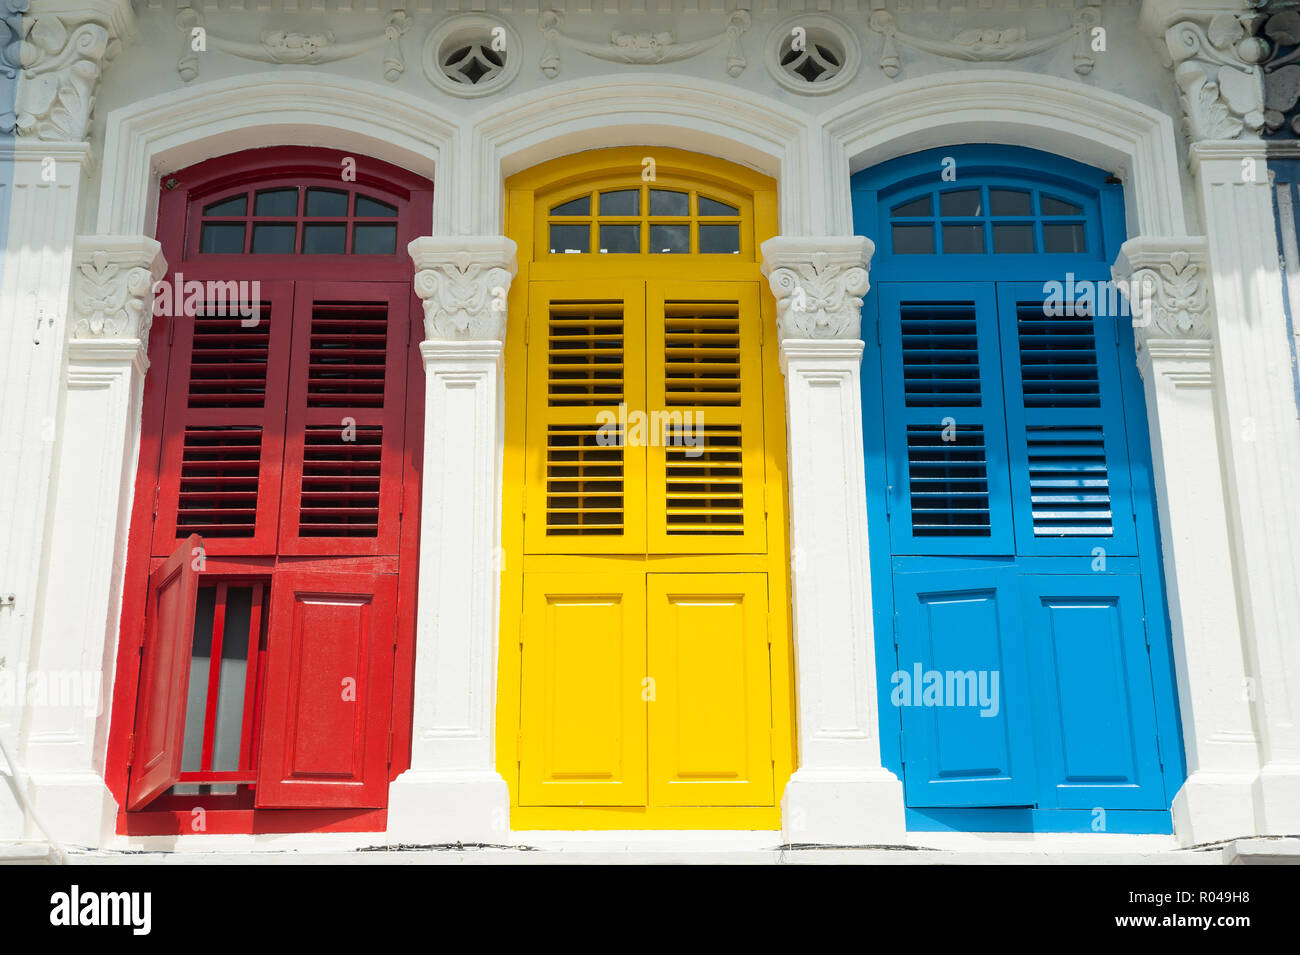 Republic of Singapore, Colorful shutters Stock Photo